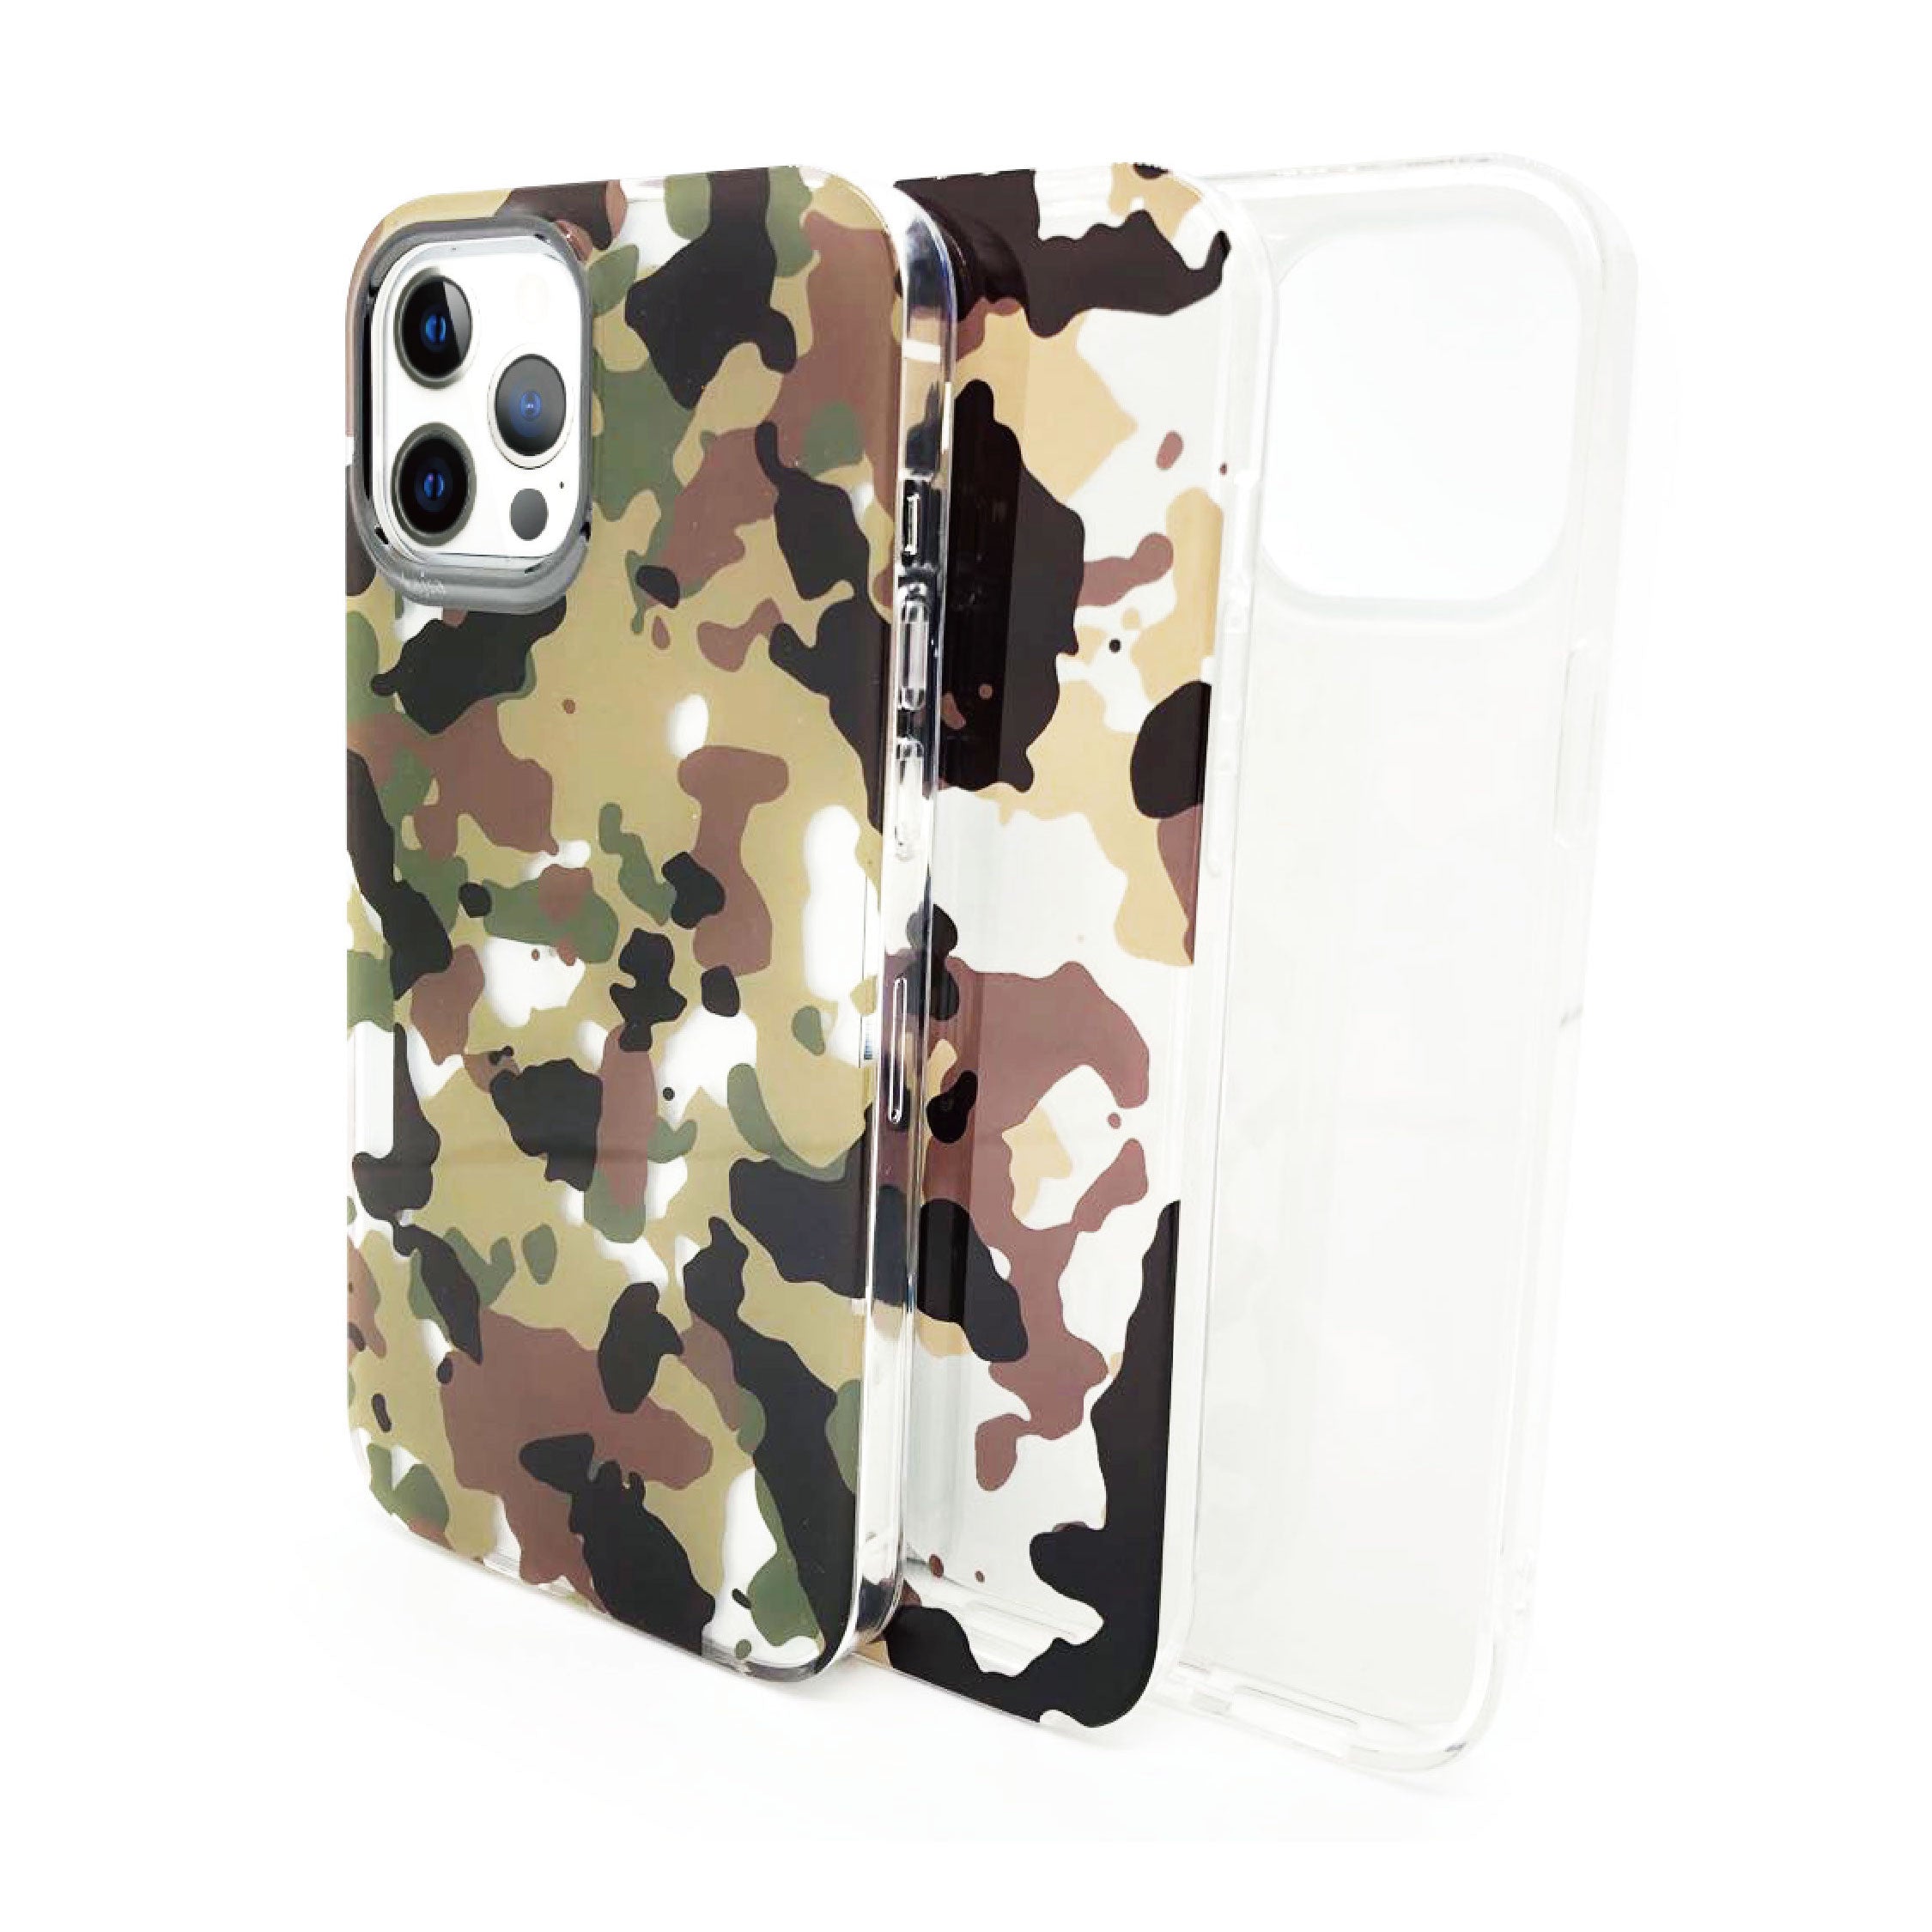 Trans-Shield Collection - Camo Pattern Back Cover for iPhone 12-Phone Case- phone case - phone cases- phone cover- iphone cover- iphone case- iphone cases- leather case- leather cases- DIYCASE - custom case - leather cover - hand strap case - croco pattern case - snake pattern case - carbon fiber phone case - phone case brand - unique phone case - high quality - phone case brand - protective case - buy phone case hong kong - online buy phone case - iphone‎手機殼 - 客製化手機殼 - samsung ‎手機殼 - 香港手機殼 - 買電話殼